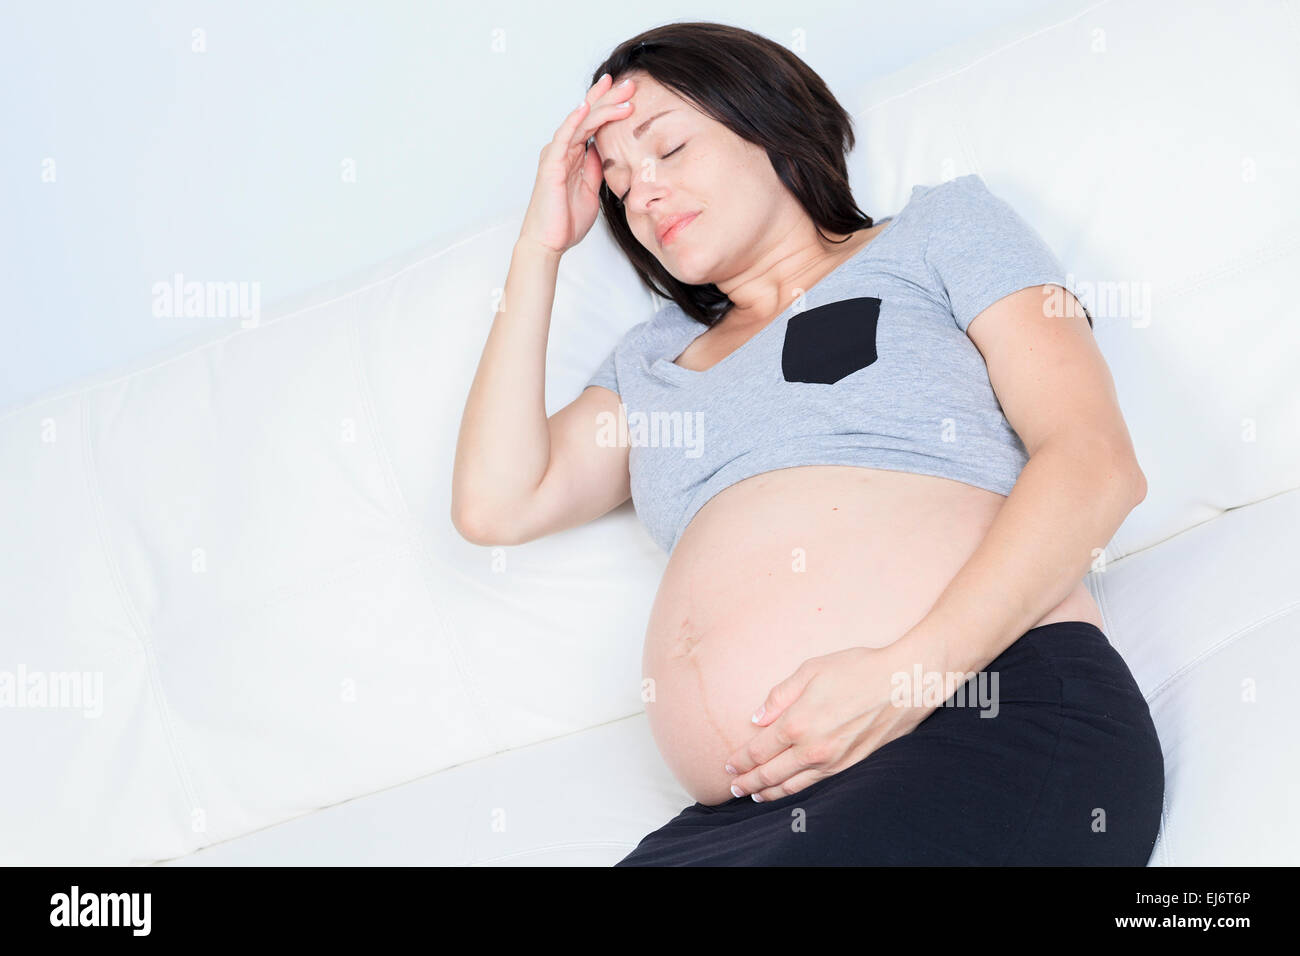 Struggling with morning sickness. Depressed pregnant woman holdi Stock Photo